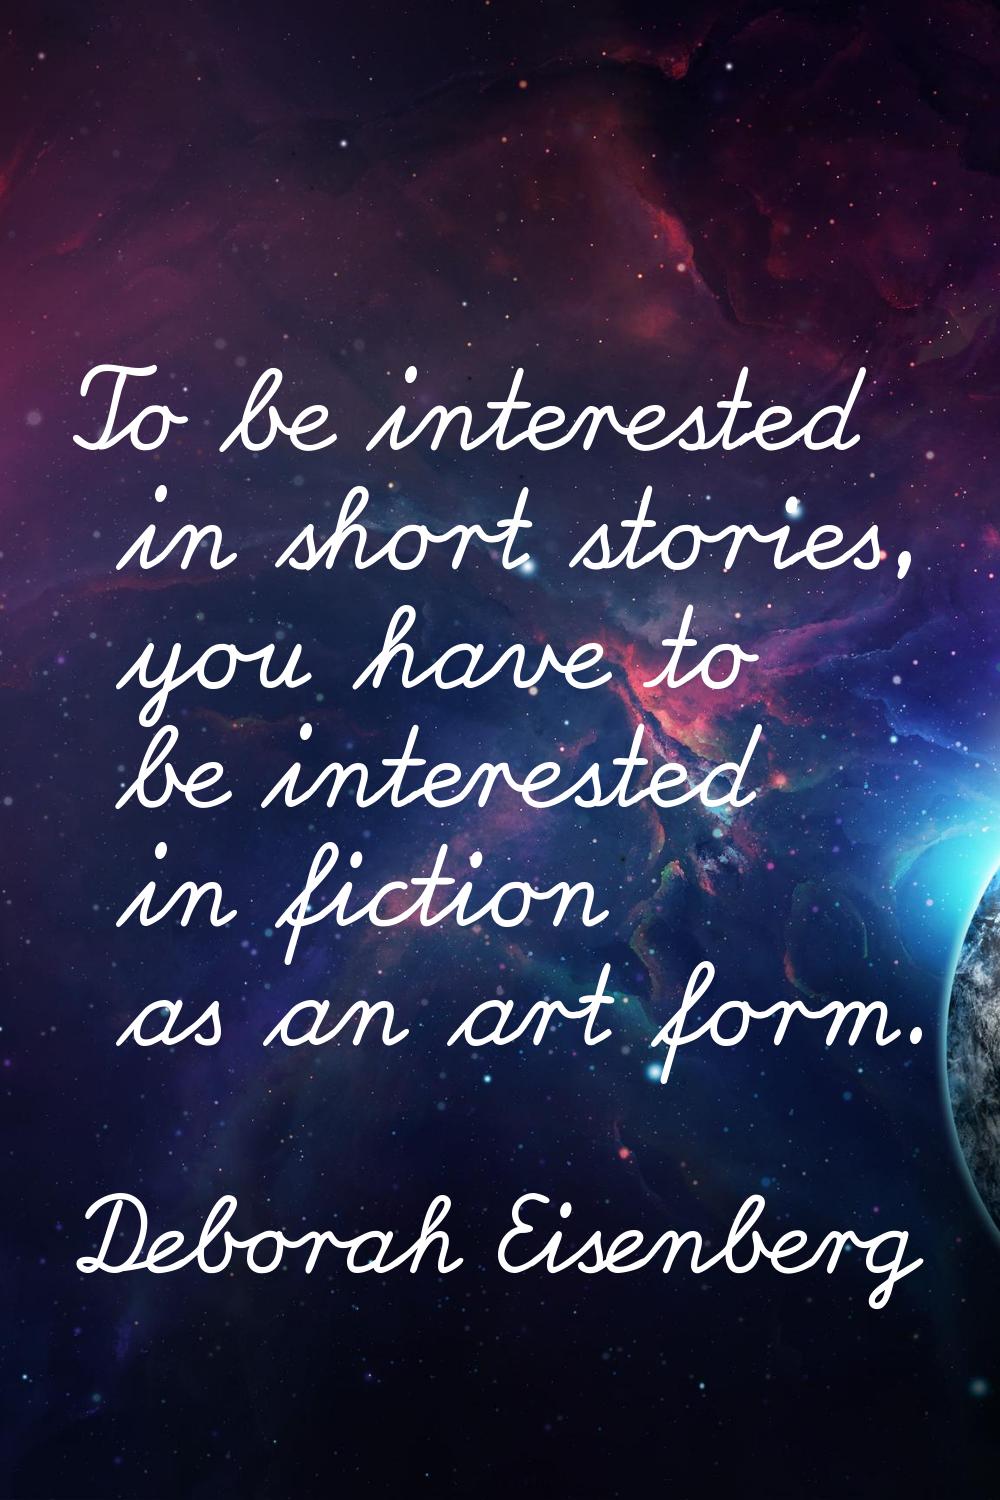 To be interested in short stories, you have to be interested in fiction as an art form.